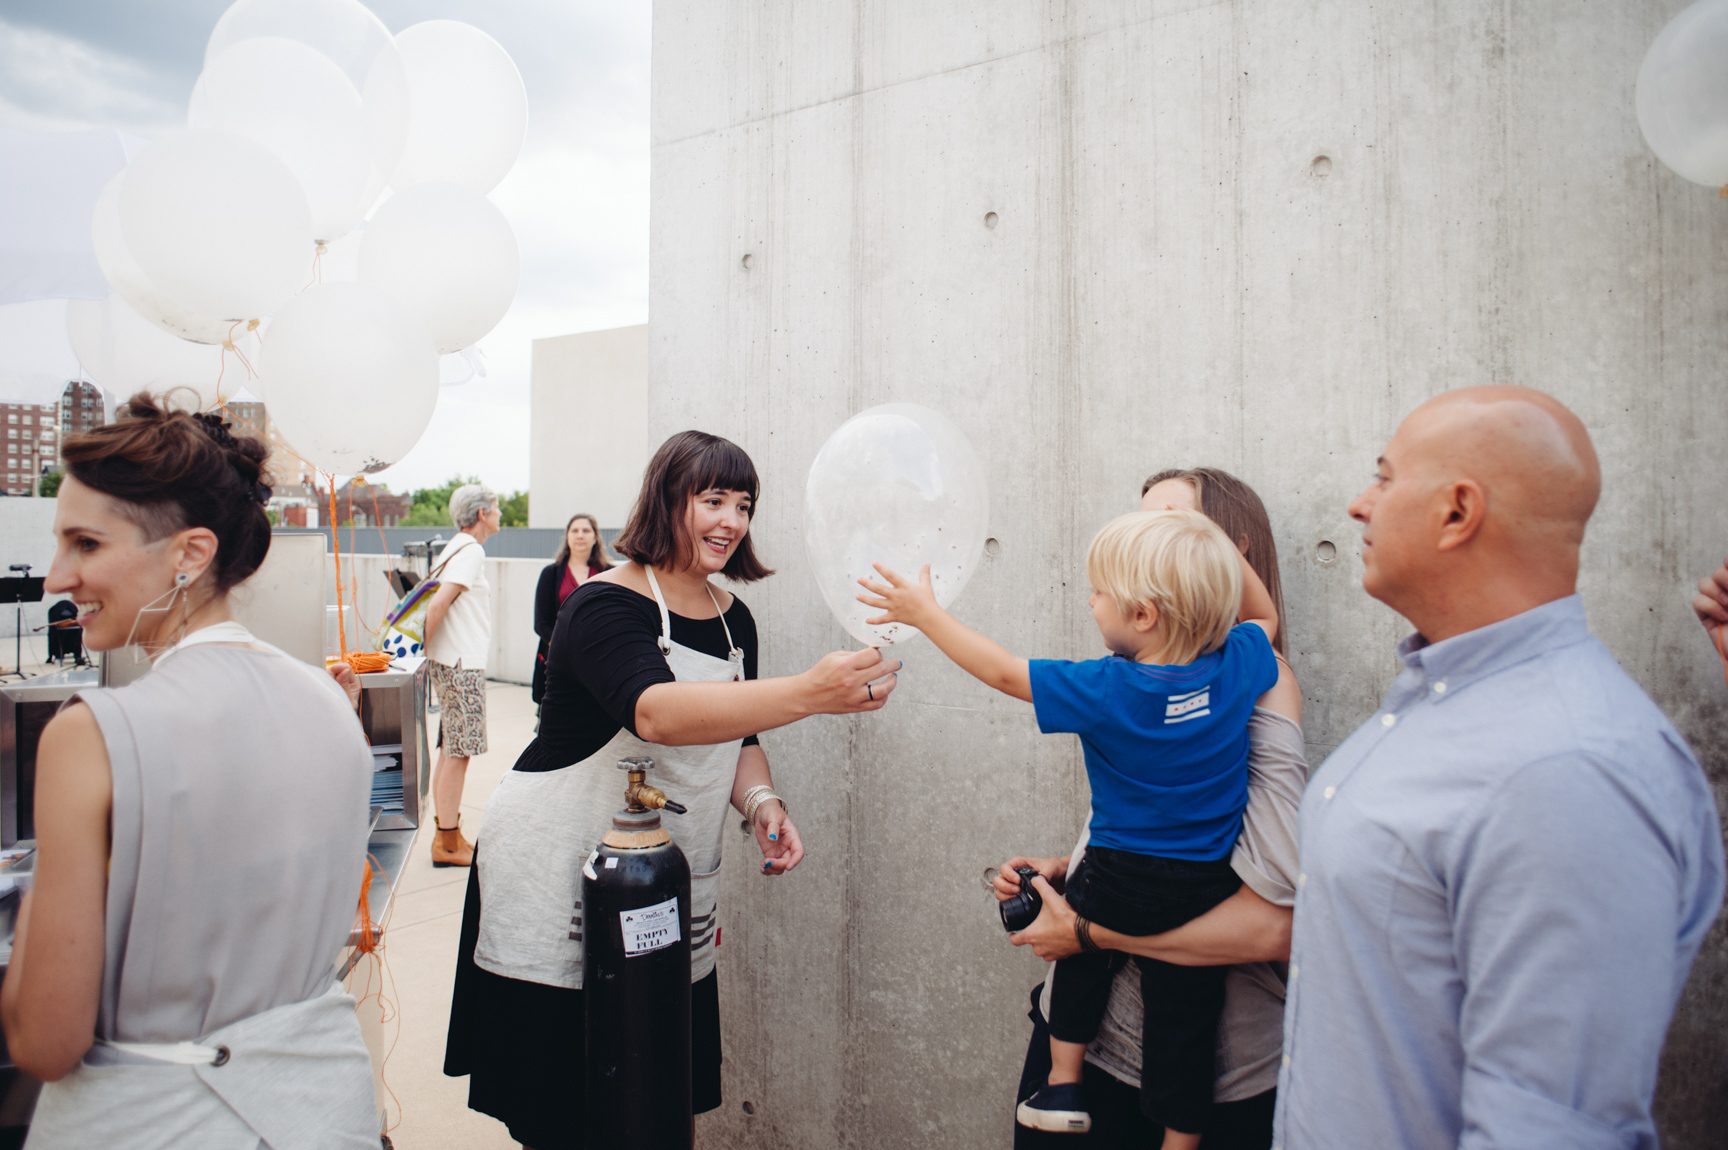 A person hands a child a white balloon during an event in the Courtyard.